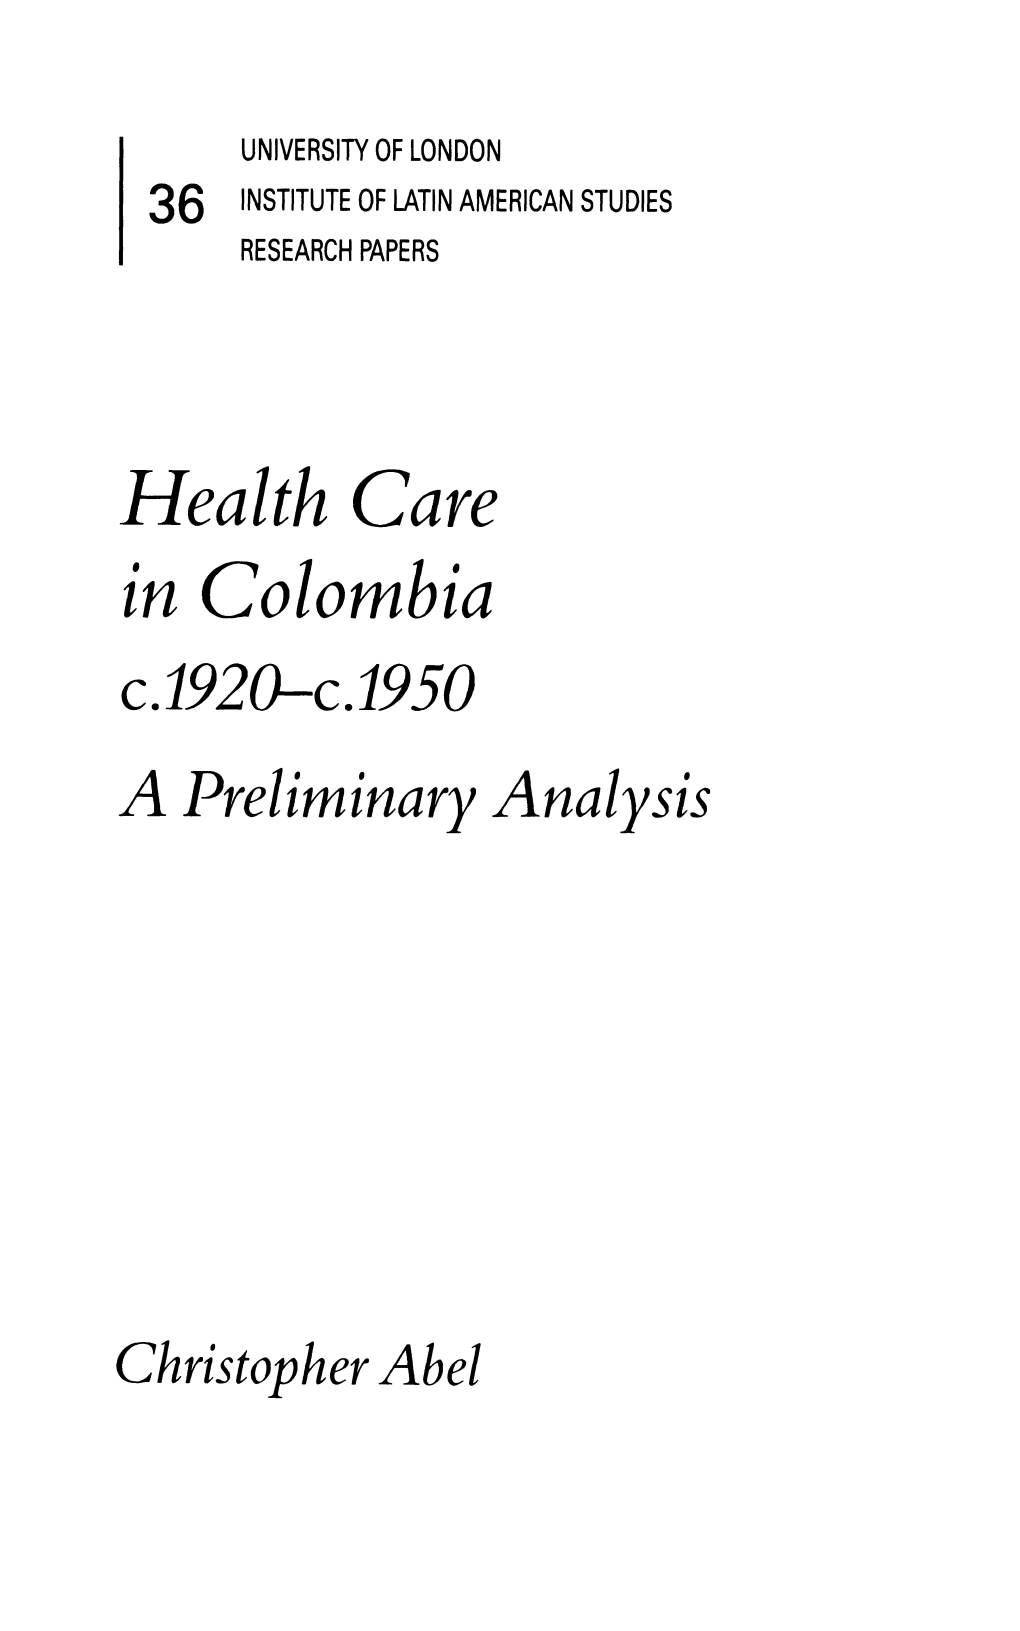 Health Care in Colombia C.1920-C.1950 a Preliminary Analysis